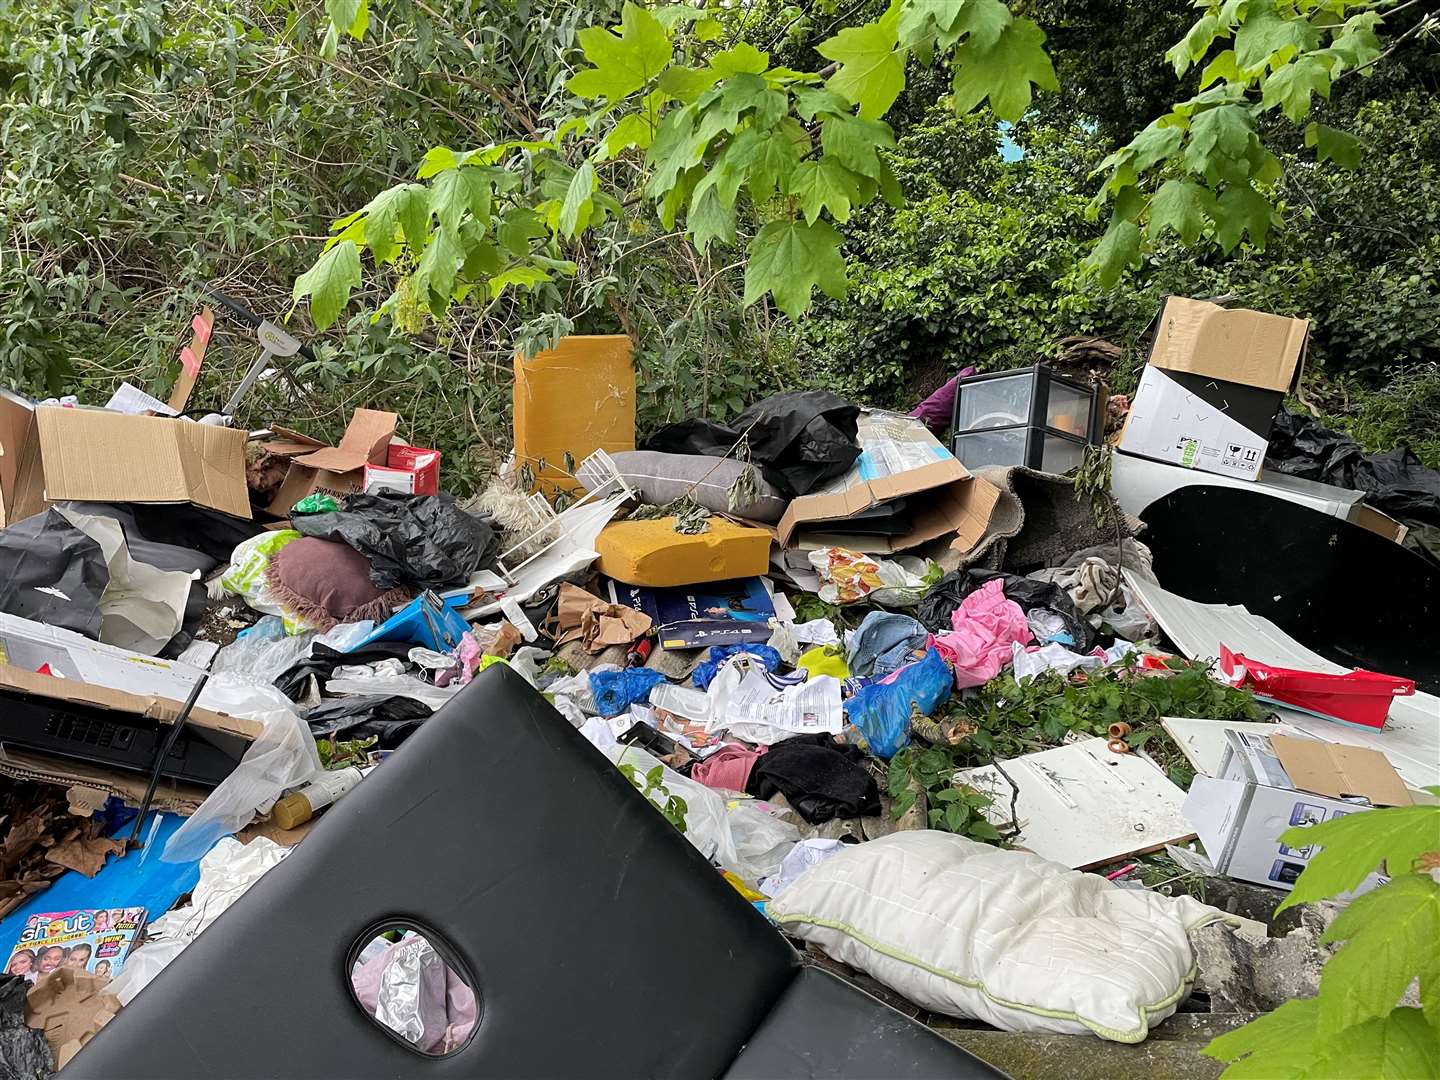 The council is investigating the fly-tipping